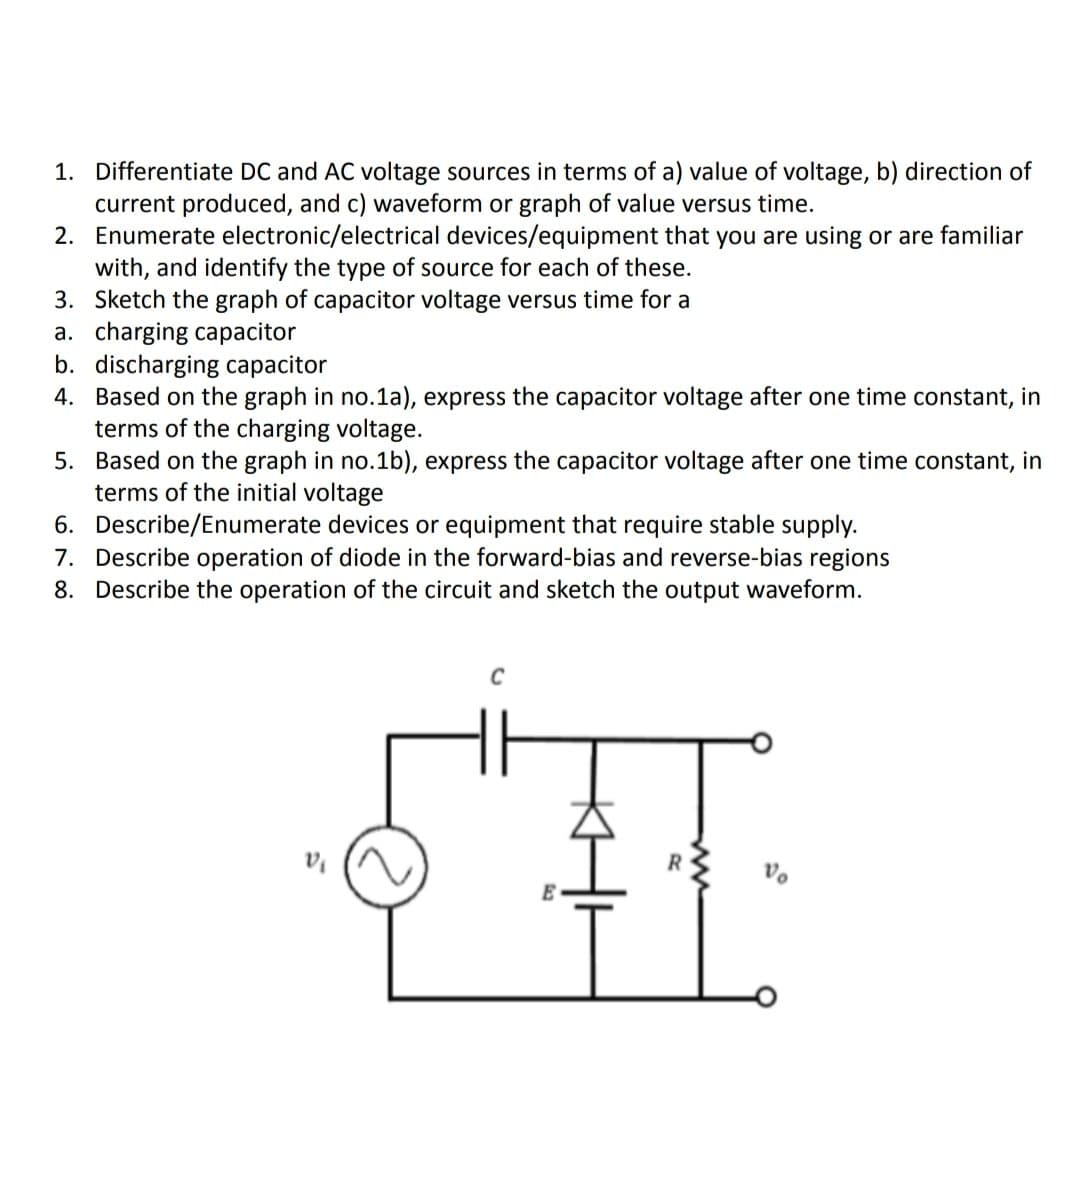 1. Differentiate DC and AC voltage sources in terms of a) value of voltage, b) direction of
current produced, and c) waveform or graph of value versus time.
2. Enumerate electronic/electrical devices/equipment that you are using or are familiar
with, and identify the type of source for each of these.
3. Sketch the graph of capacitor voltage versus time for a
a. charging capacitor
b. discharging capacitor
4. Based on the graph in no.1a), express the capacitor voltage after one time constant, in
terms of the charging voltage.
5. Based on the graph in no.1b), express the capacitor
terms of the initial voltage
6. Describe/Enumerate devices or equipment that require stable supply.
7. Describe operation of diode in the forward-bias and reverse-bias regions
8. Describe the operation of the circuit and sketch the output waveform.
age after one time constant, in
R
